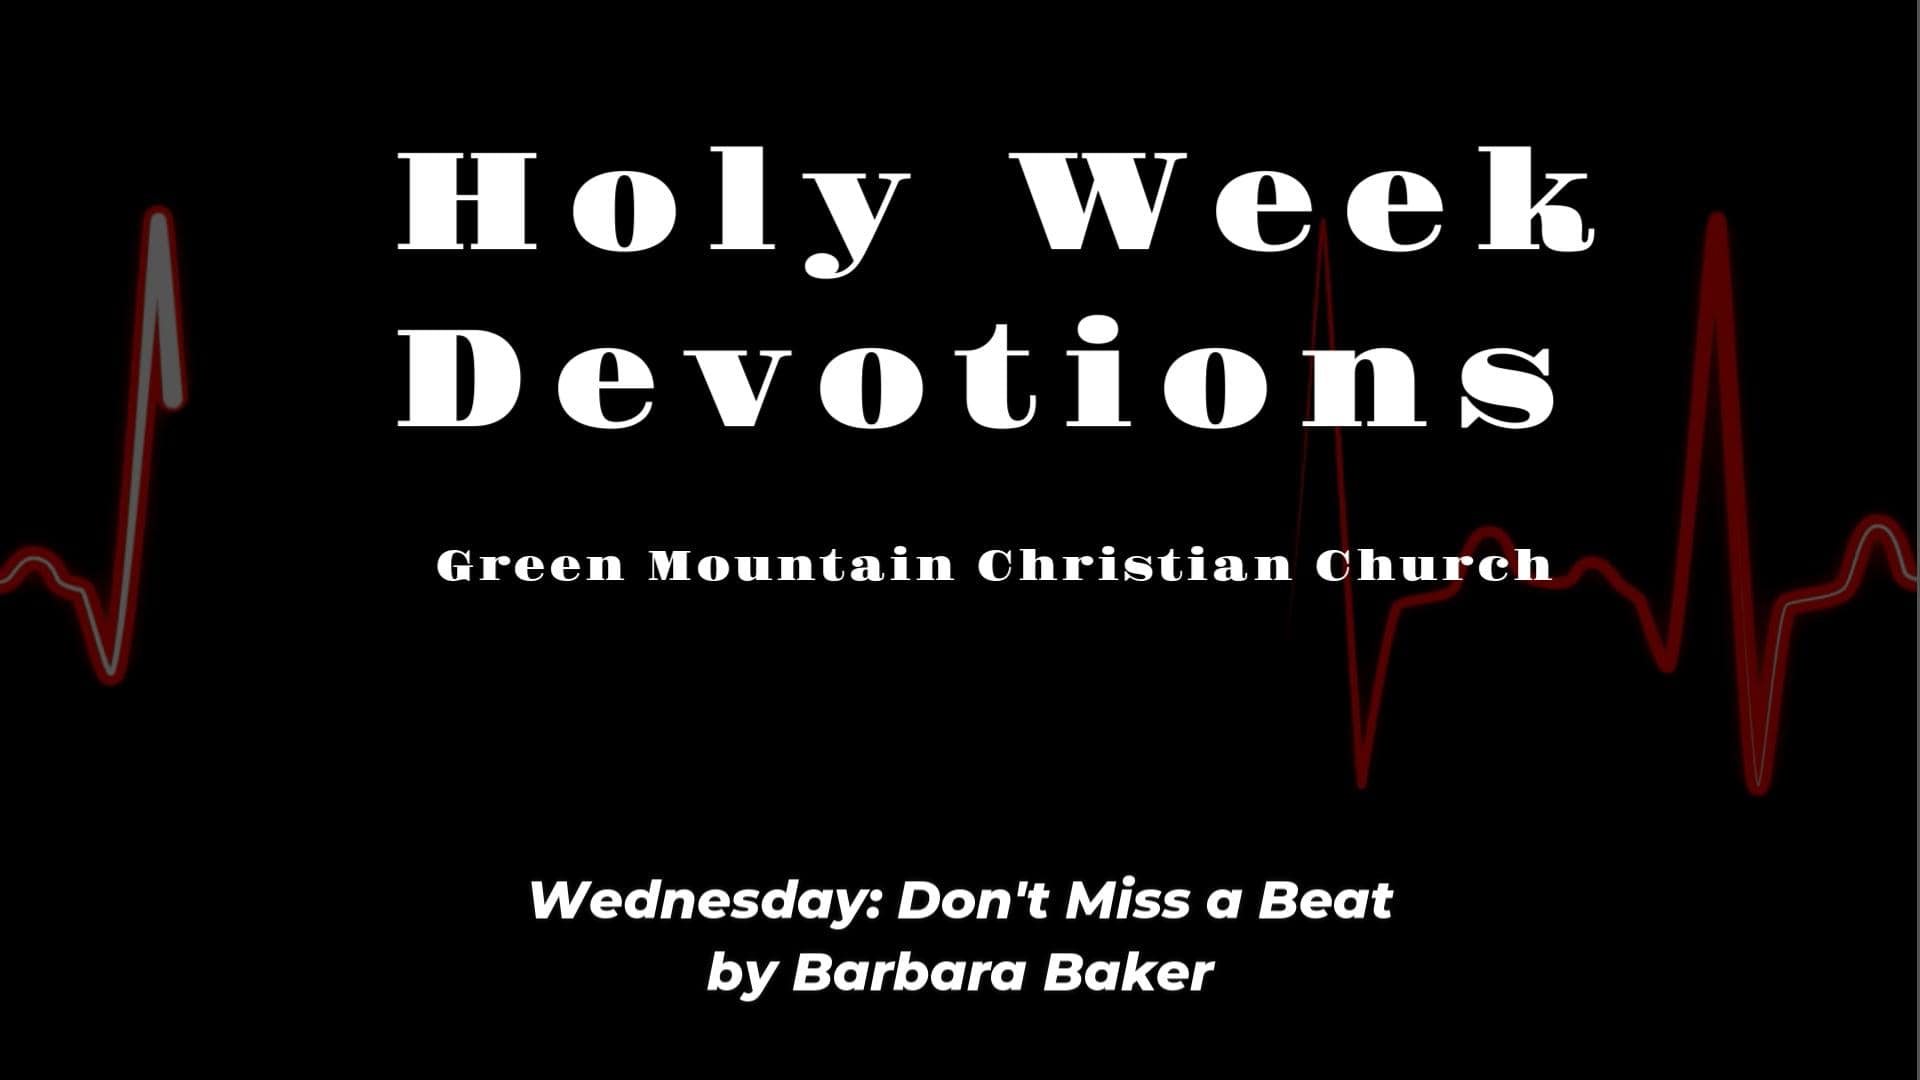 A red heart beat reading against a black background with the title "Holy Week Devotions - Green Mountain Christian Church - Thursday: Don't skip a beat by Barbara Baker."